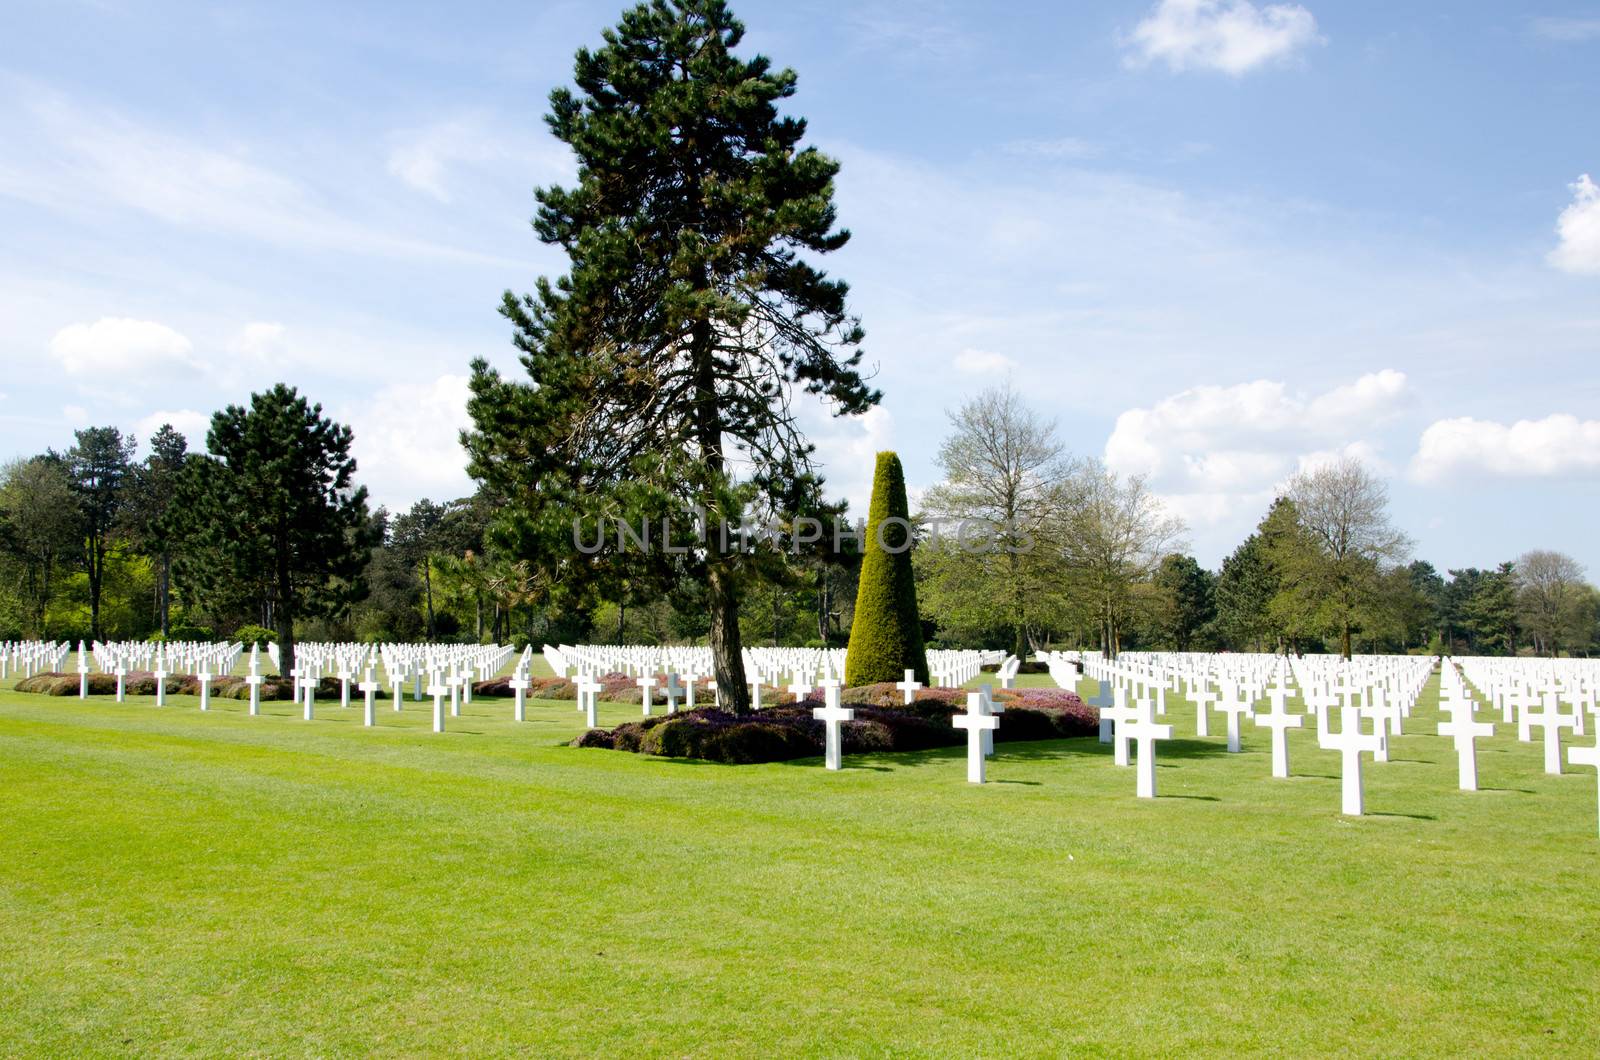 Normandy cemetery by lauria